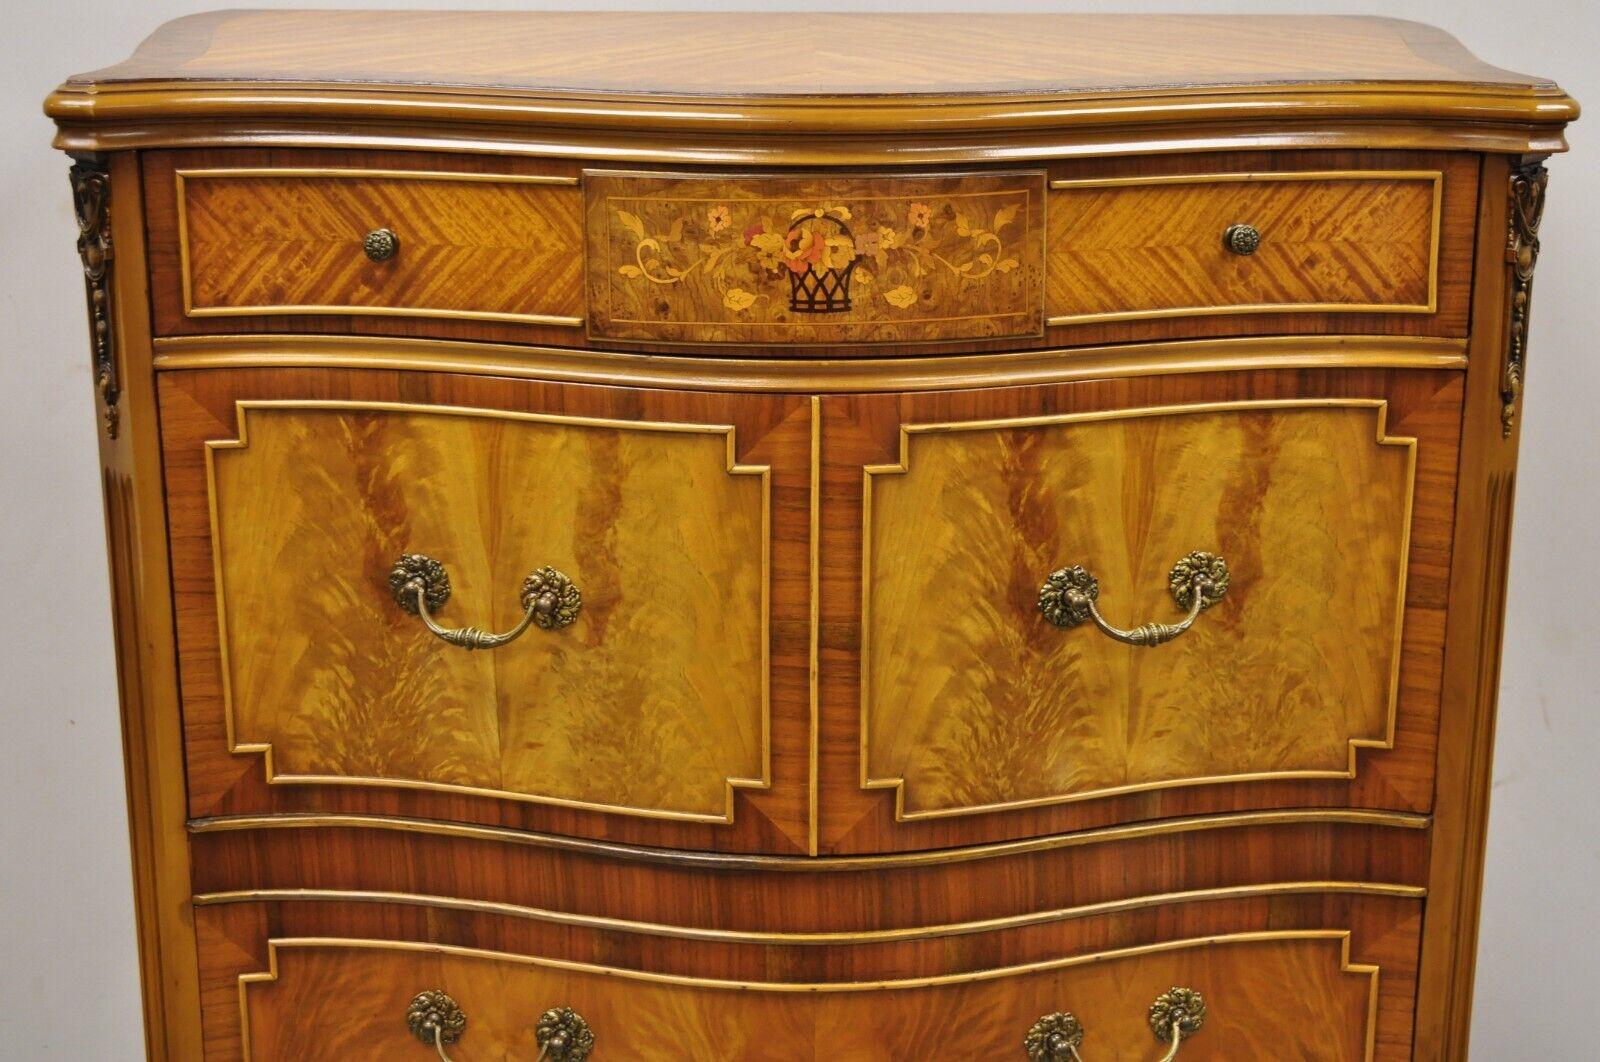 Antique French Louis XV Style satinwood serpentine highboy tall chest dresser by Joerns. Item features serpentine front, banded inlay top, floral inlay, beautiful woodgrain, nicely carved details, original label, 5 dovetailed drawers, very nice